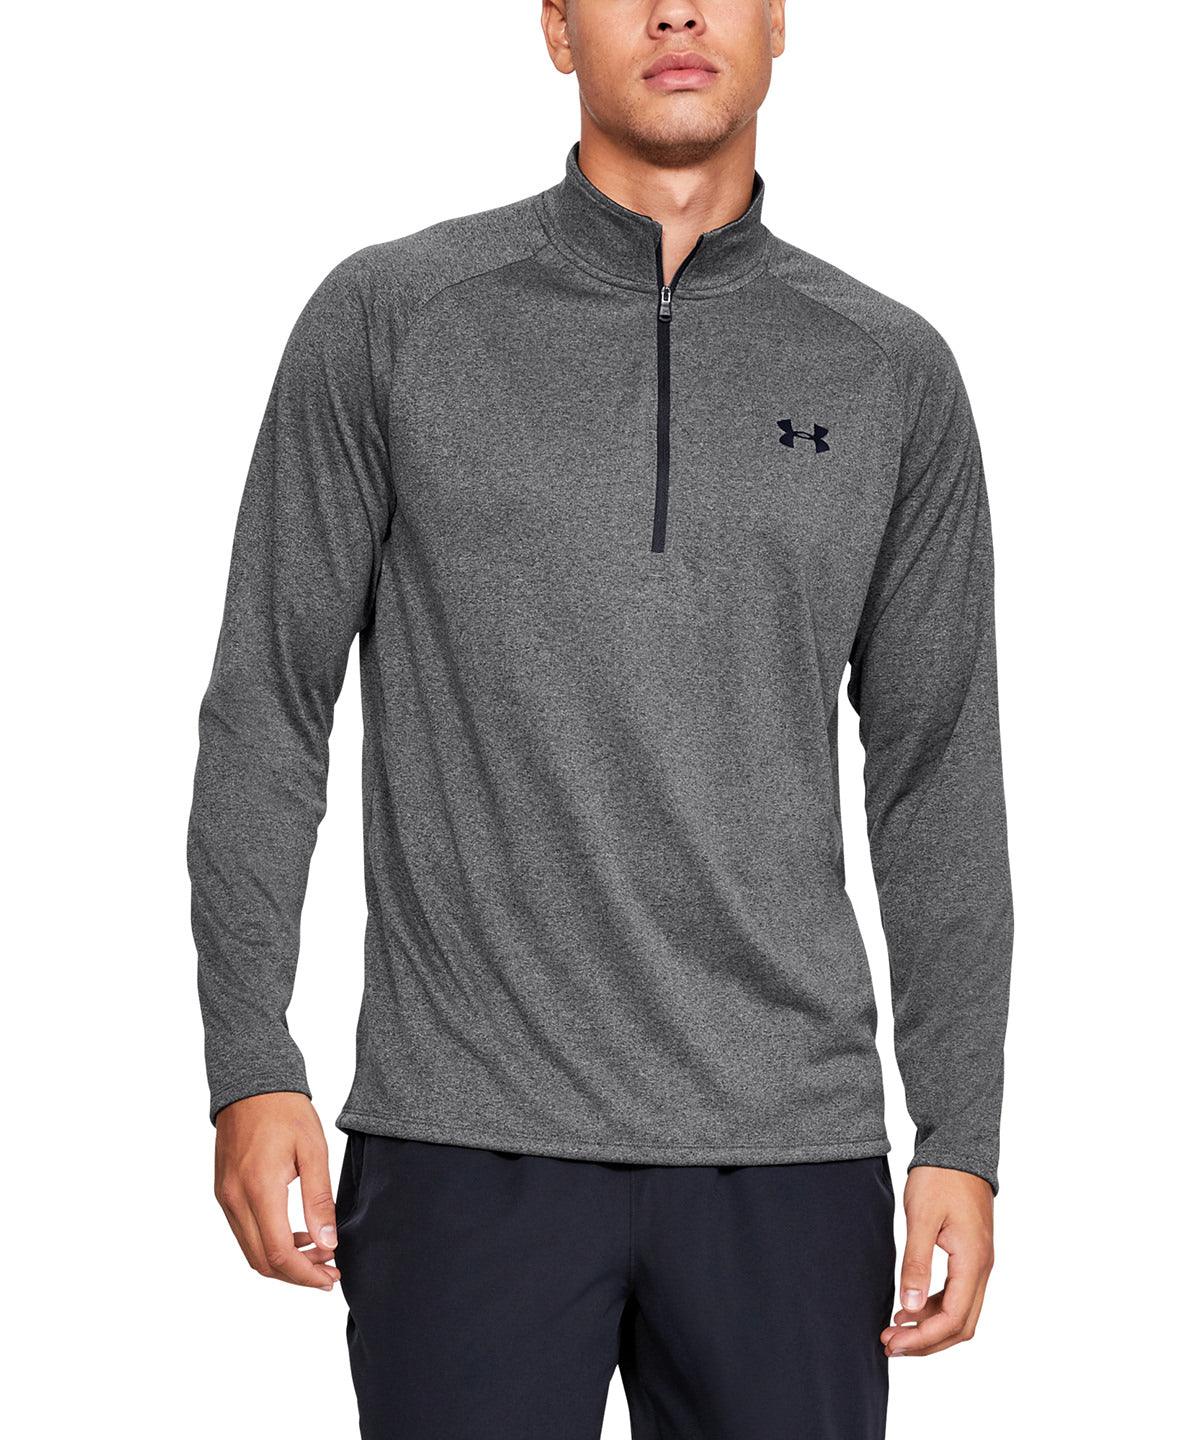 Black/Charcoal - Tech™ 2.0 1/2 zip long sleeve Sports Overtops Under Armour Activewear & Performance, Back to the Gym, Exclusives, Gymwear, Must Haves, New Sizes for 2021, Outdoor Sports, Plus Sizes, Premium, Premium Sports, Sports & Leisure, Team Sportswear Schoolwear Centres